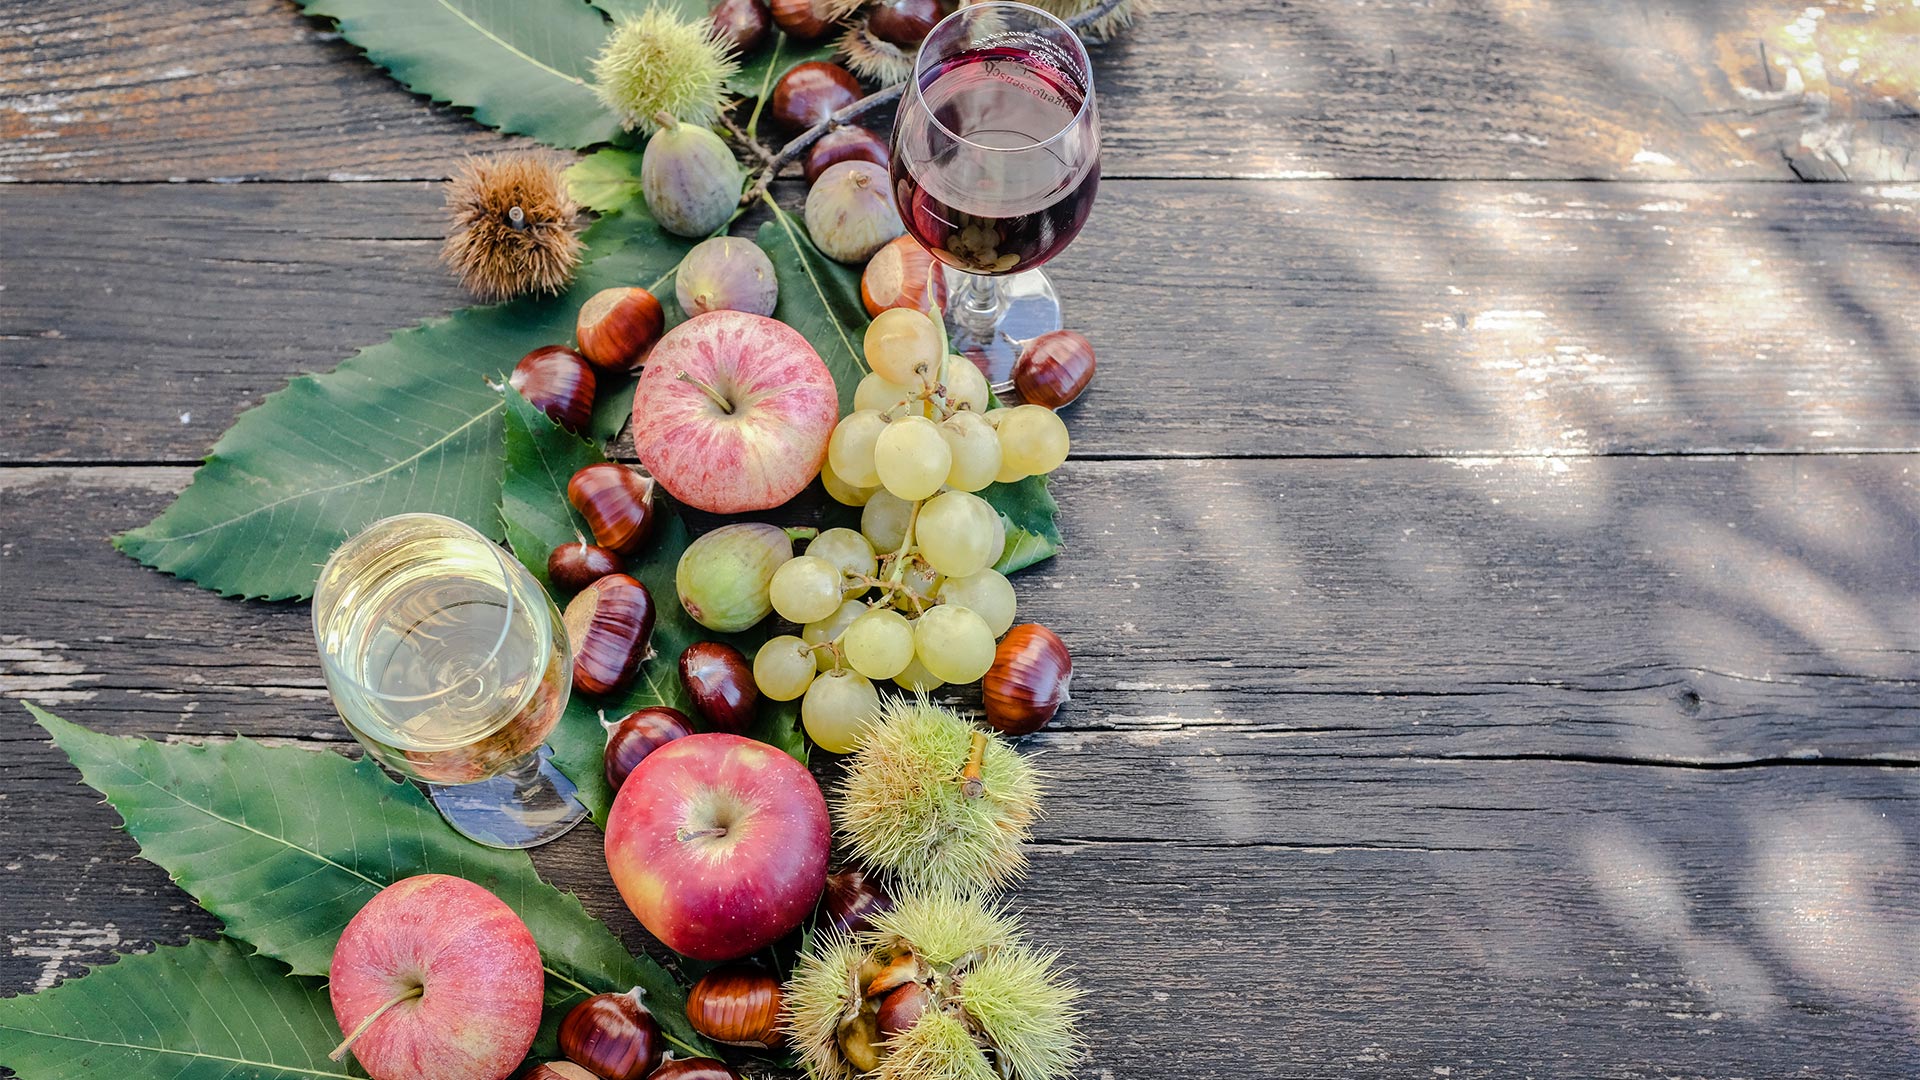 A seasonal dish of red apples, grapes and chestnuts accompanied by a glass of white wine.